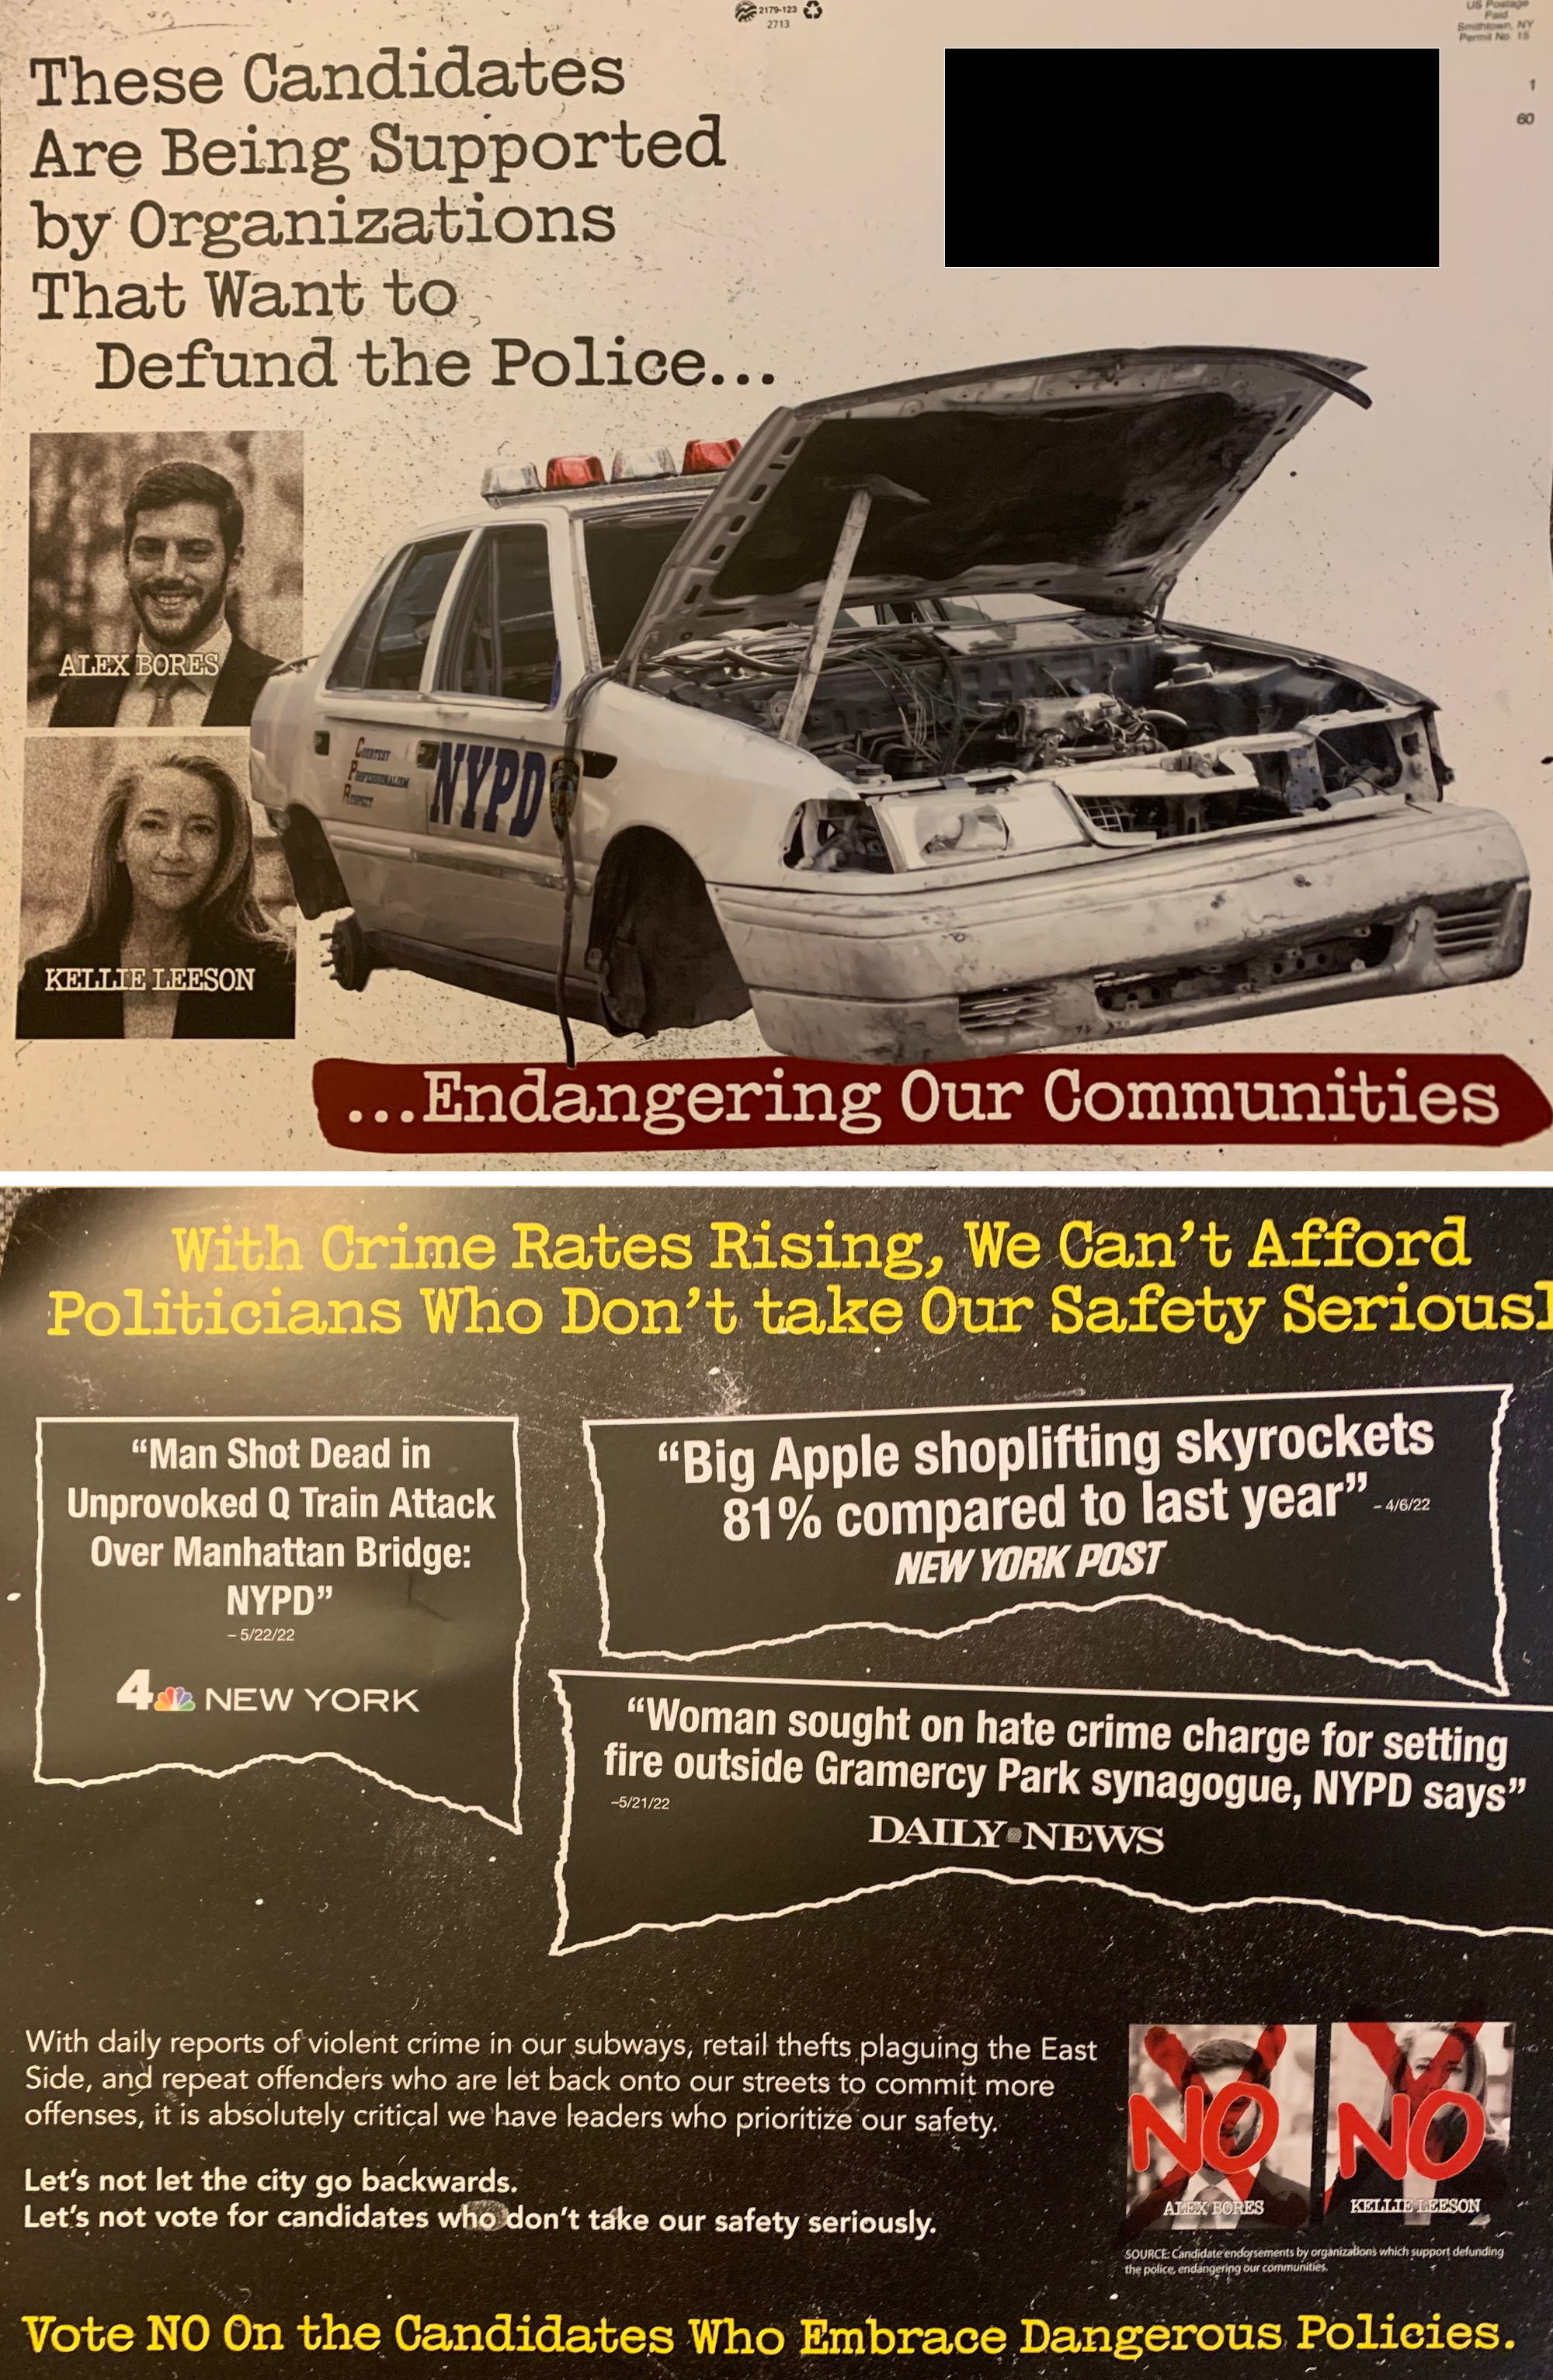 Mailer sent by Russell Squire's campaign accuses opponents of supporting 'defund the police'